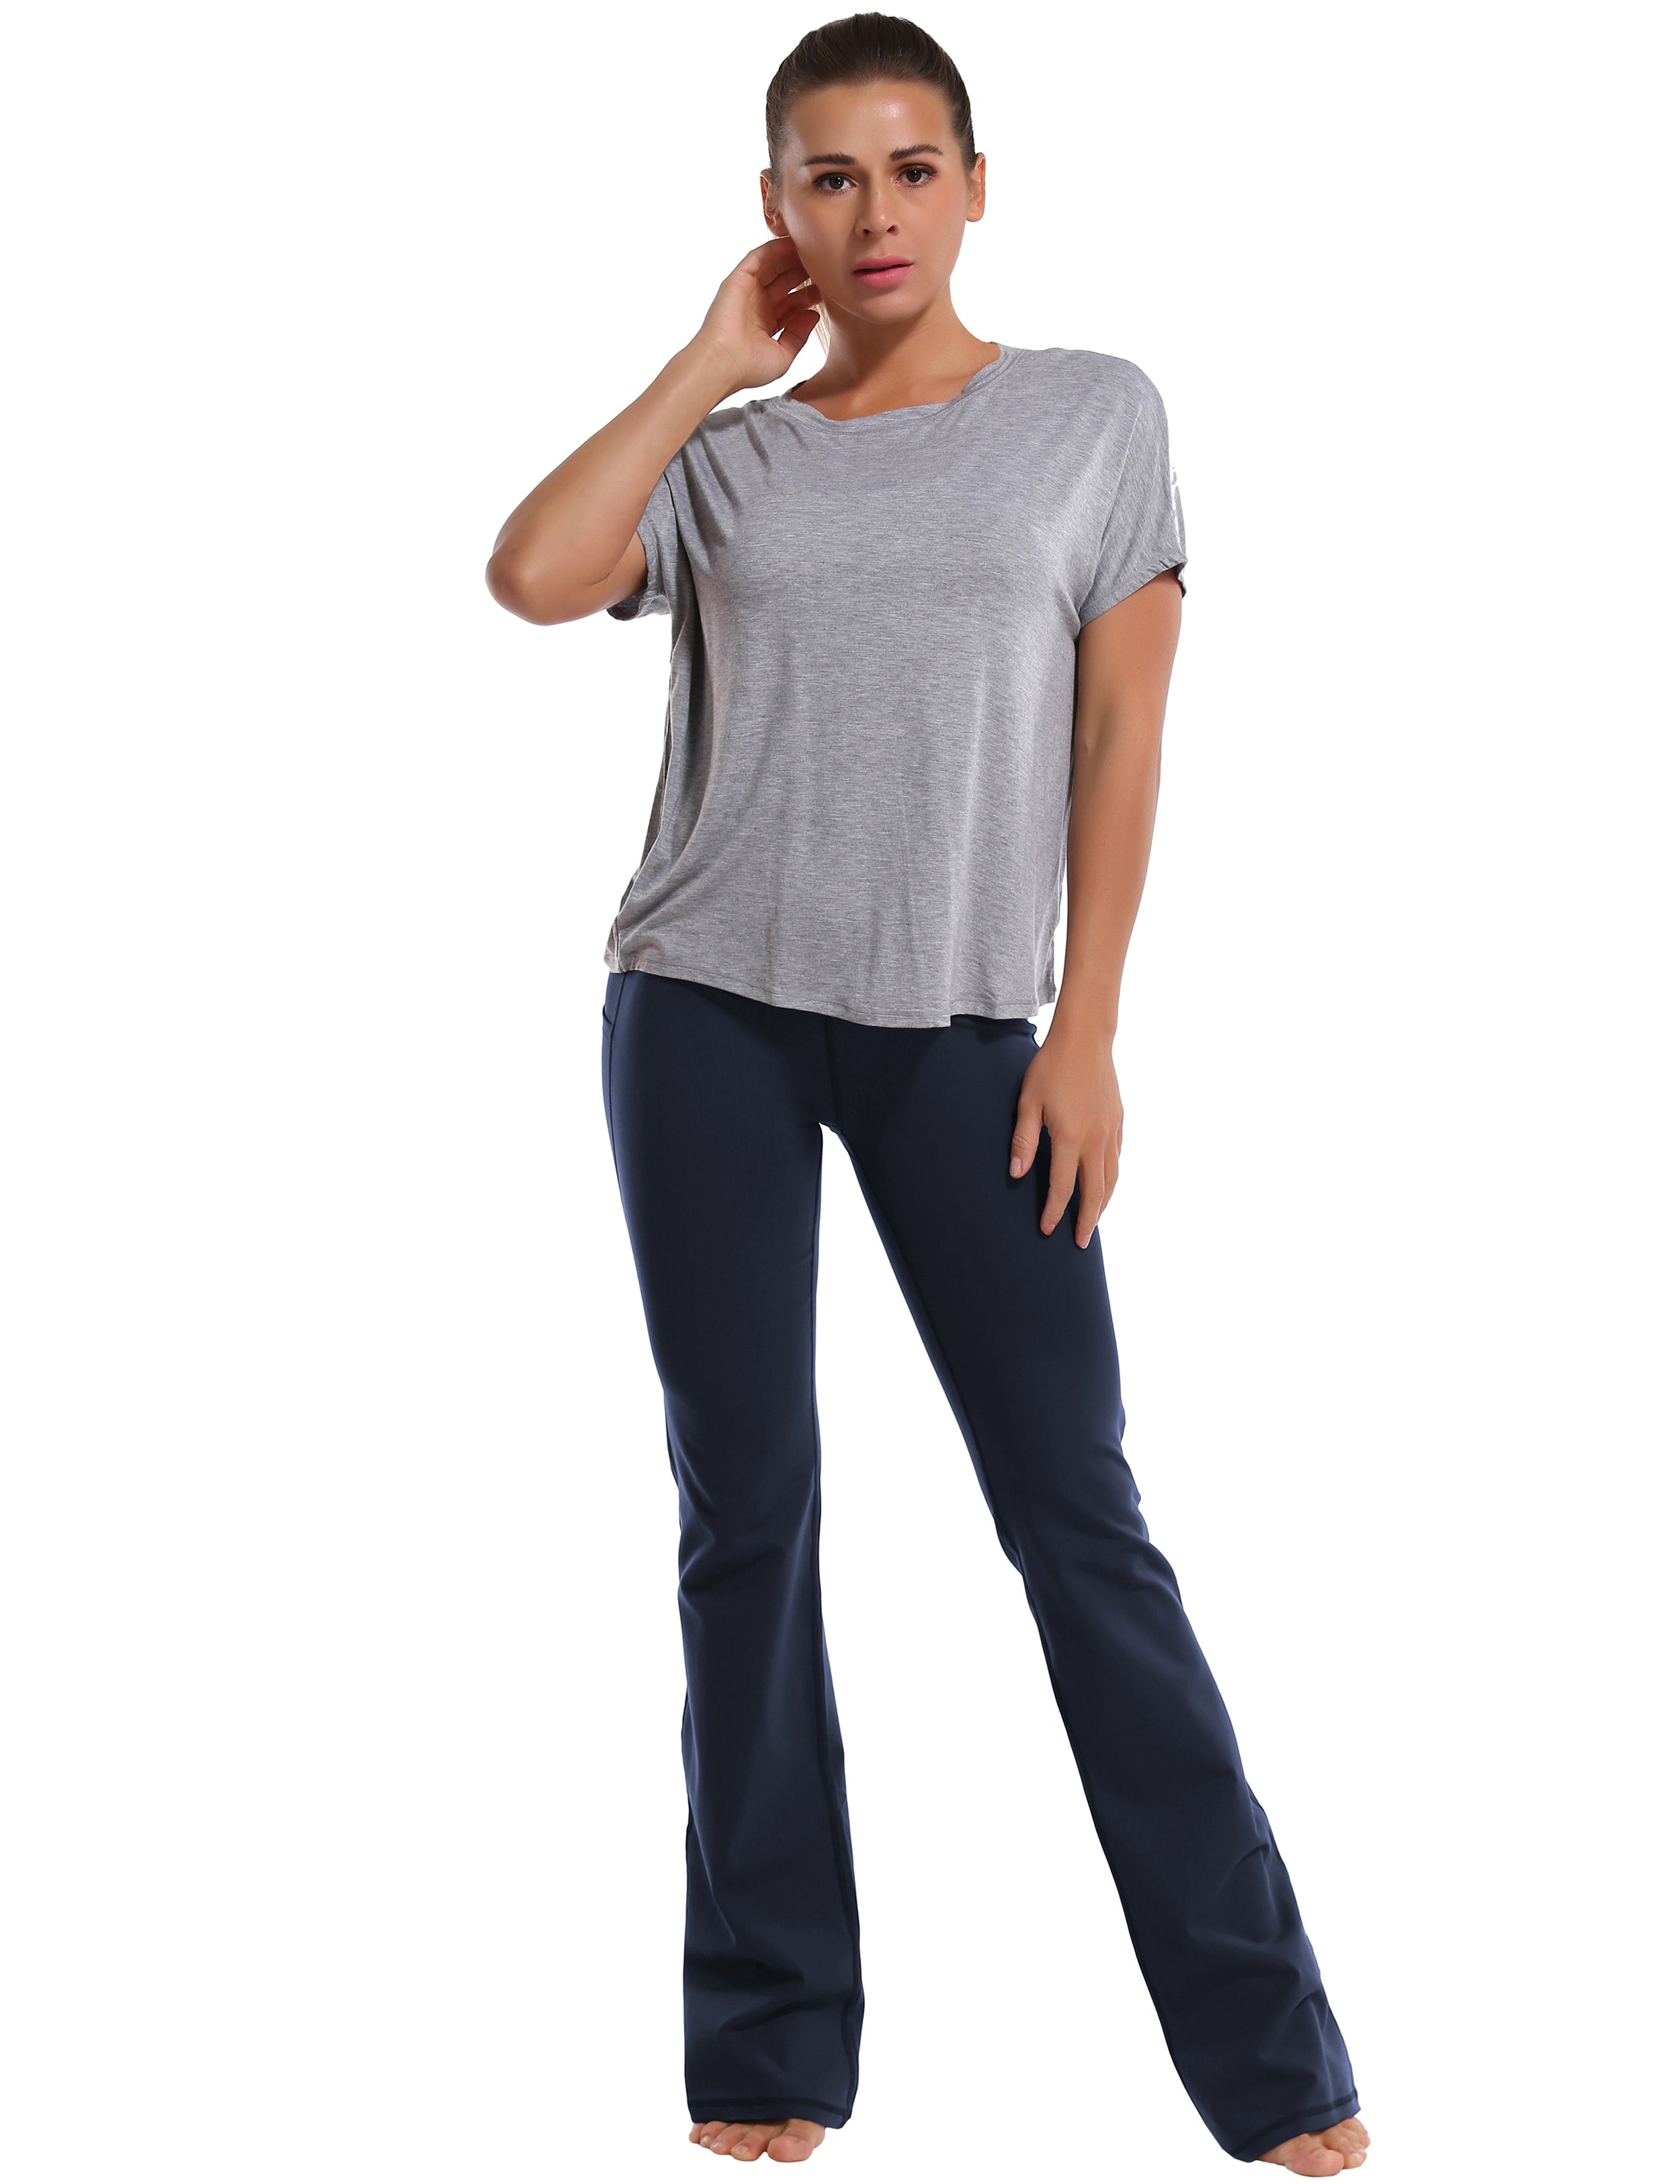 139 Side Pockets Bootcut Leggings darknavy 87%Nylon/13%Spandex Fabric doesn't attract lint easily 4-way stretch No see-through Moisture-wicking Tummy control Inner pocket Four lengths